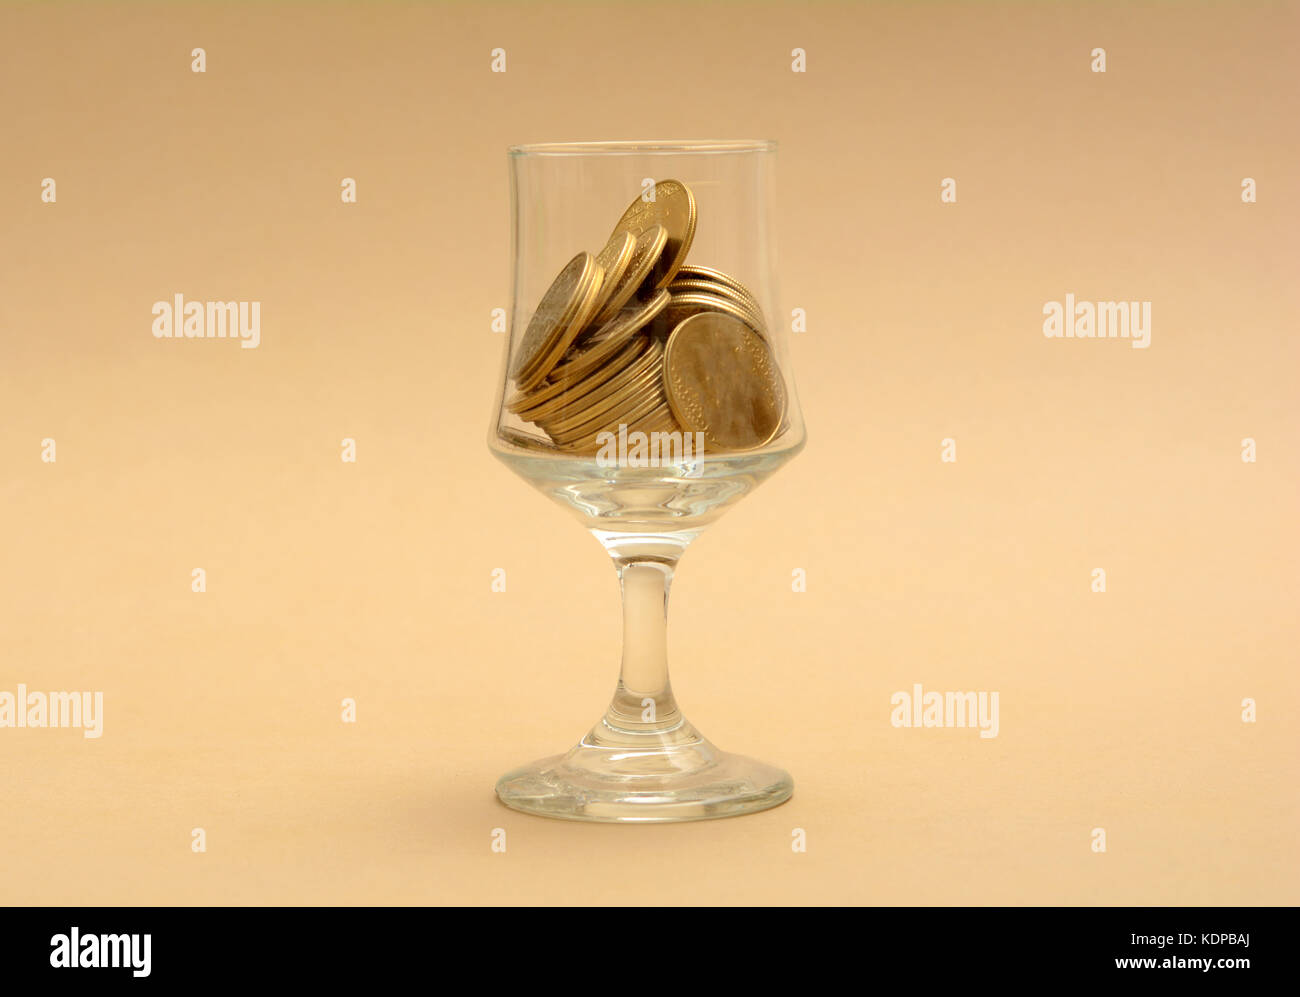 Glass Half filled with Golden Coins - Finance Concept. Stock Photo